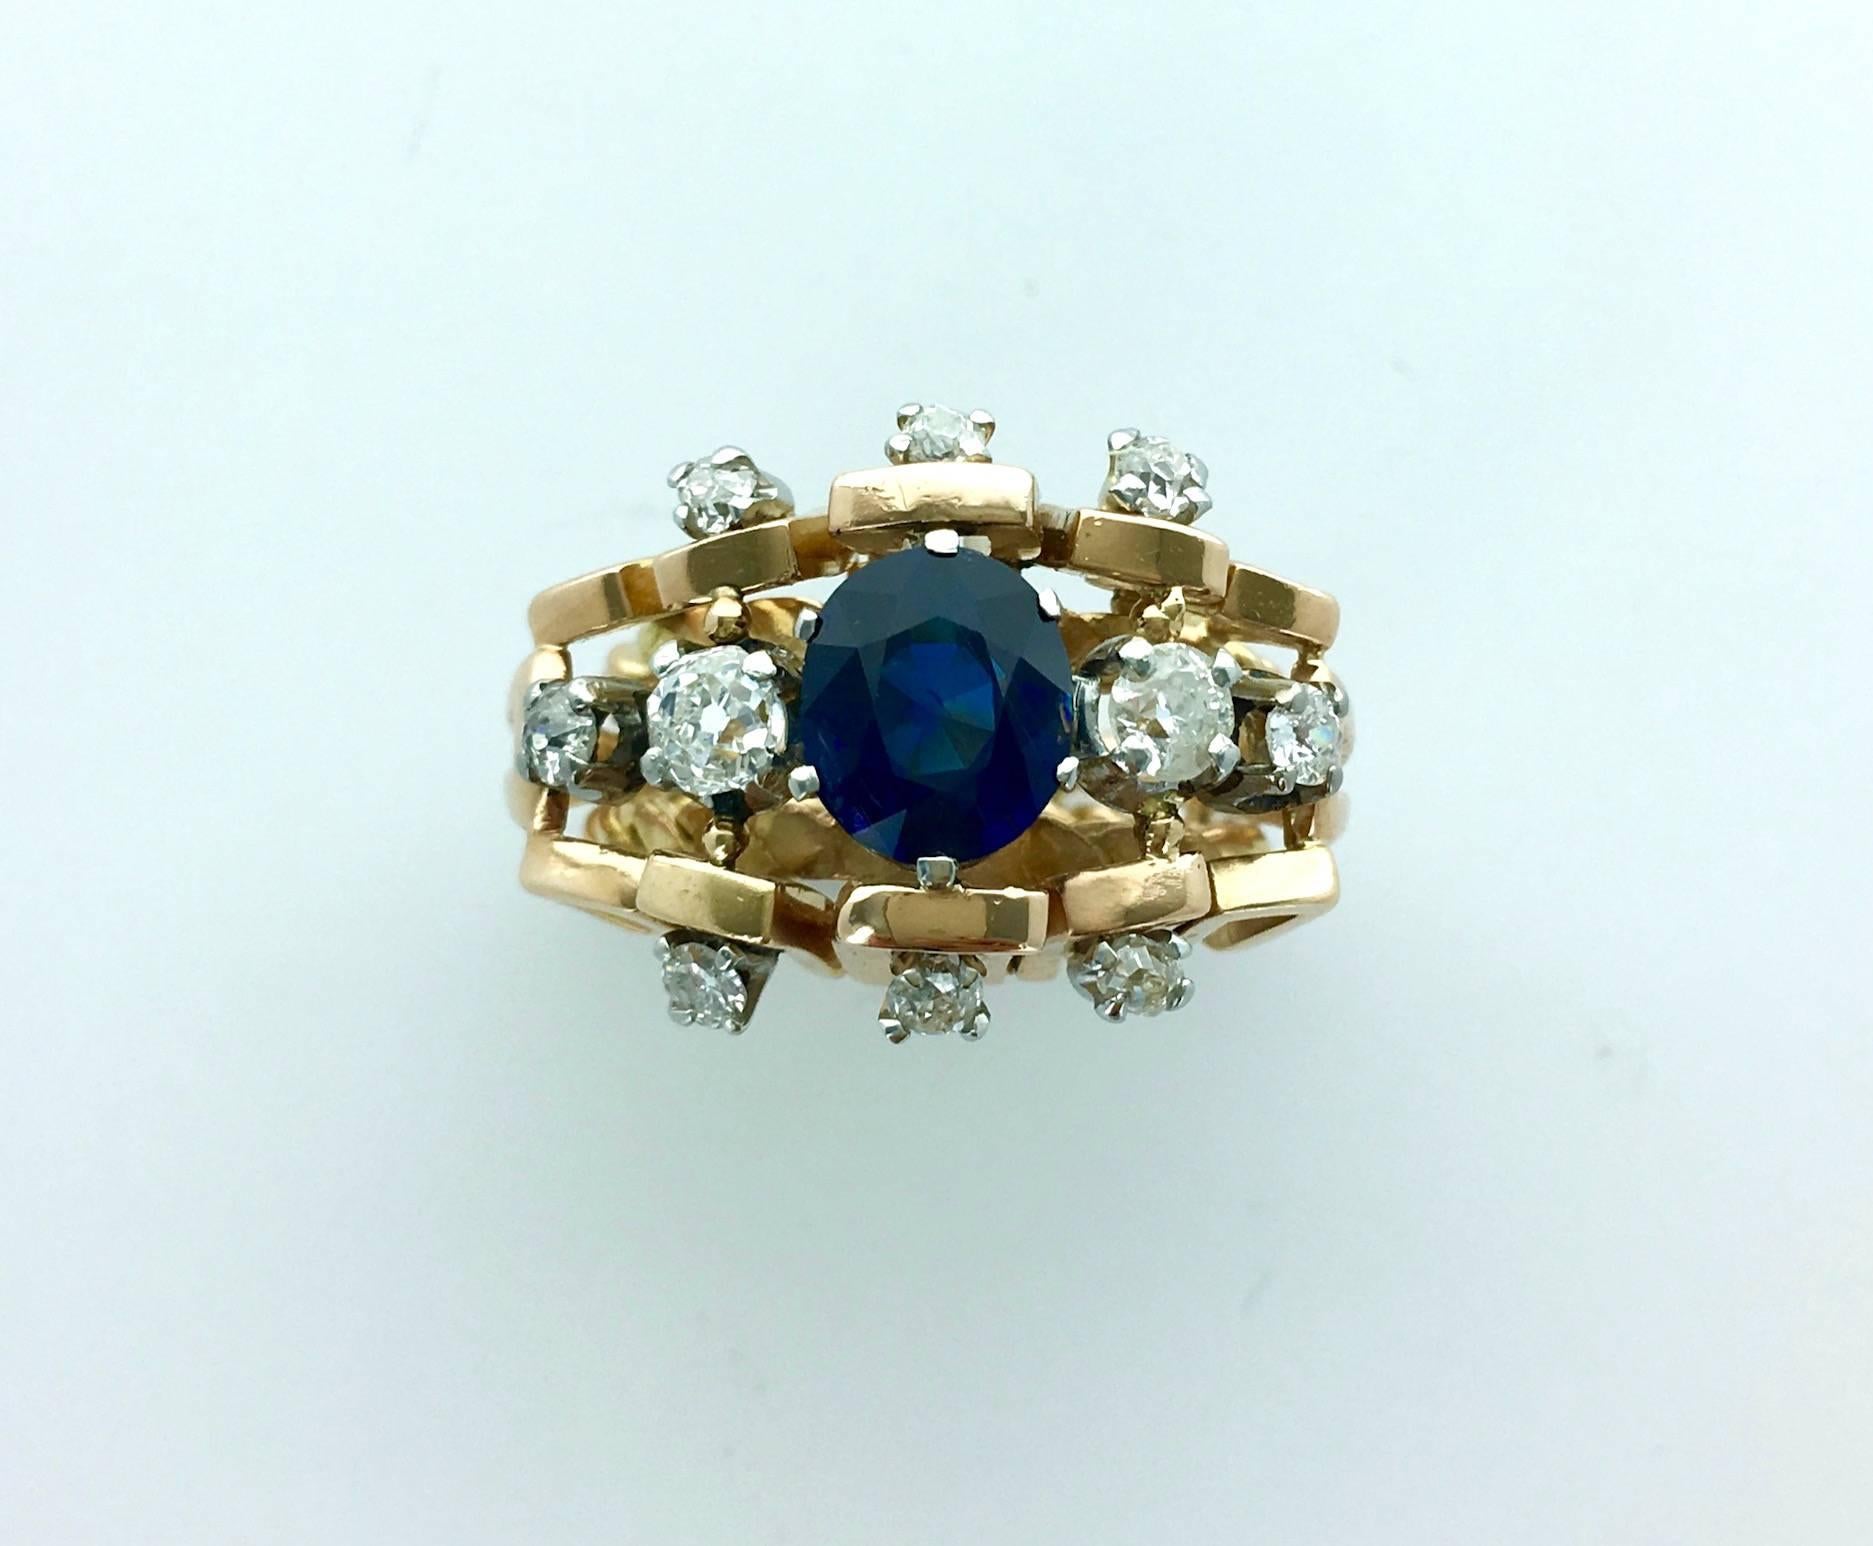 Great creation in pink gold and platinum centered by a natural blue Sapphire surrounded by Diamond.
Circa 1950.

Gross weight: 14.76 grams.